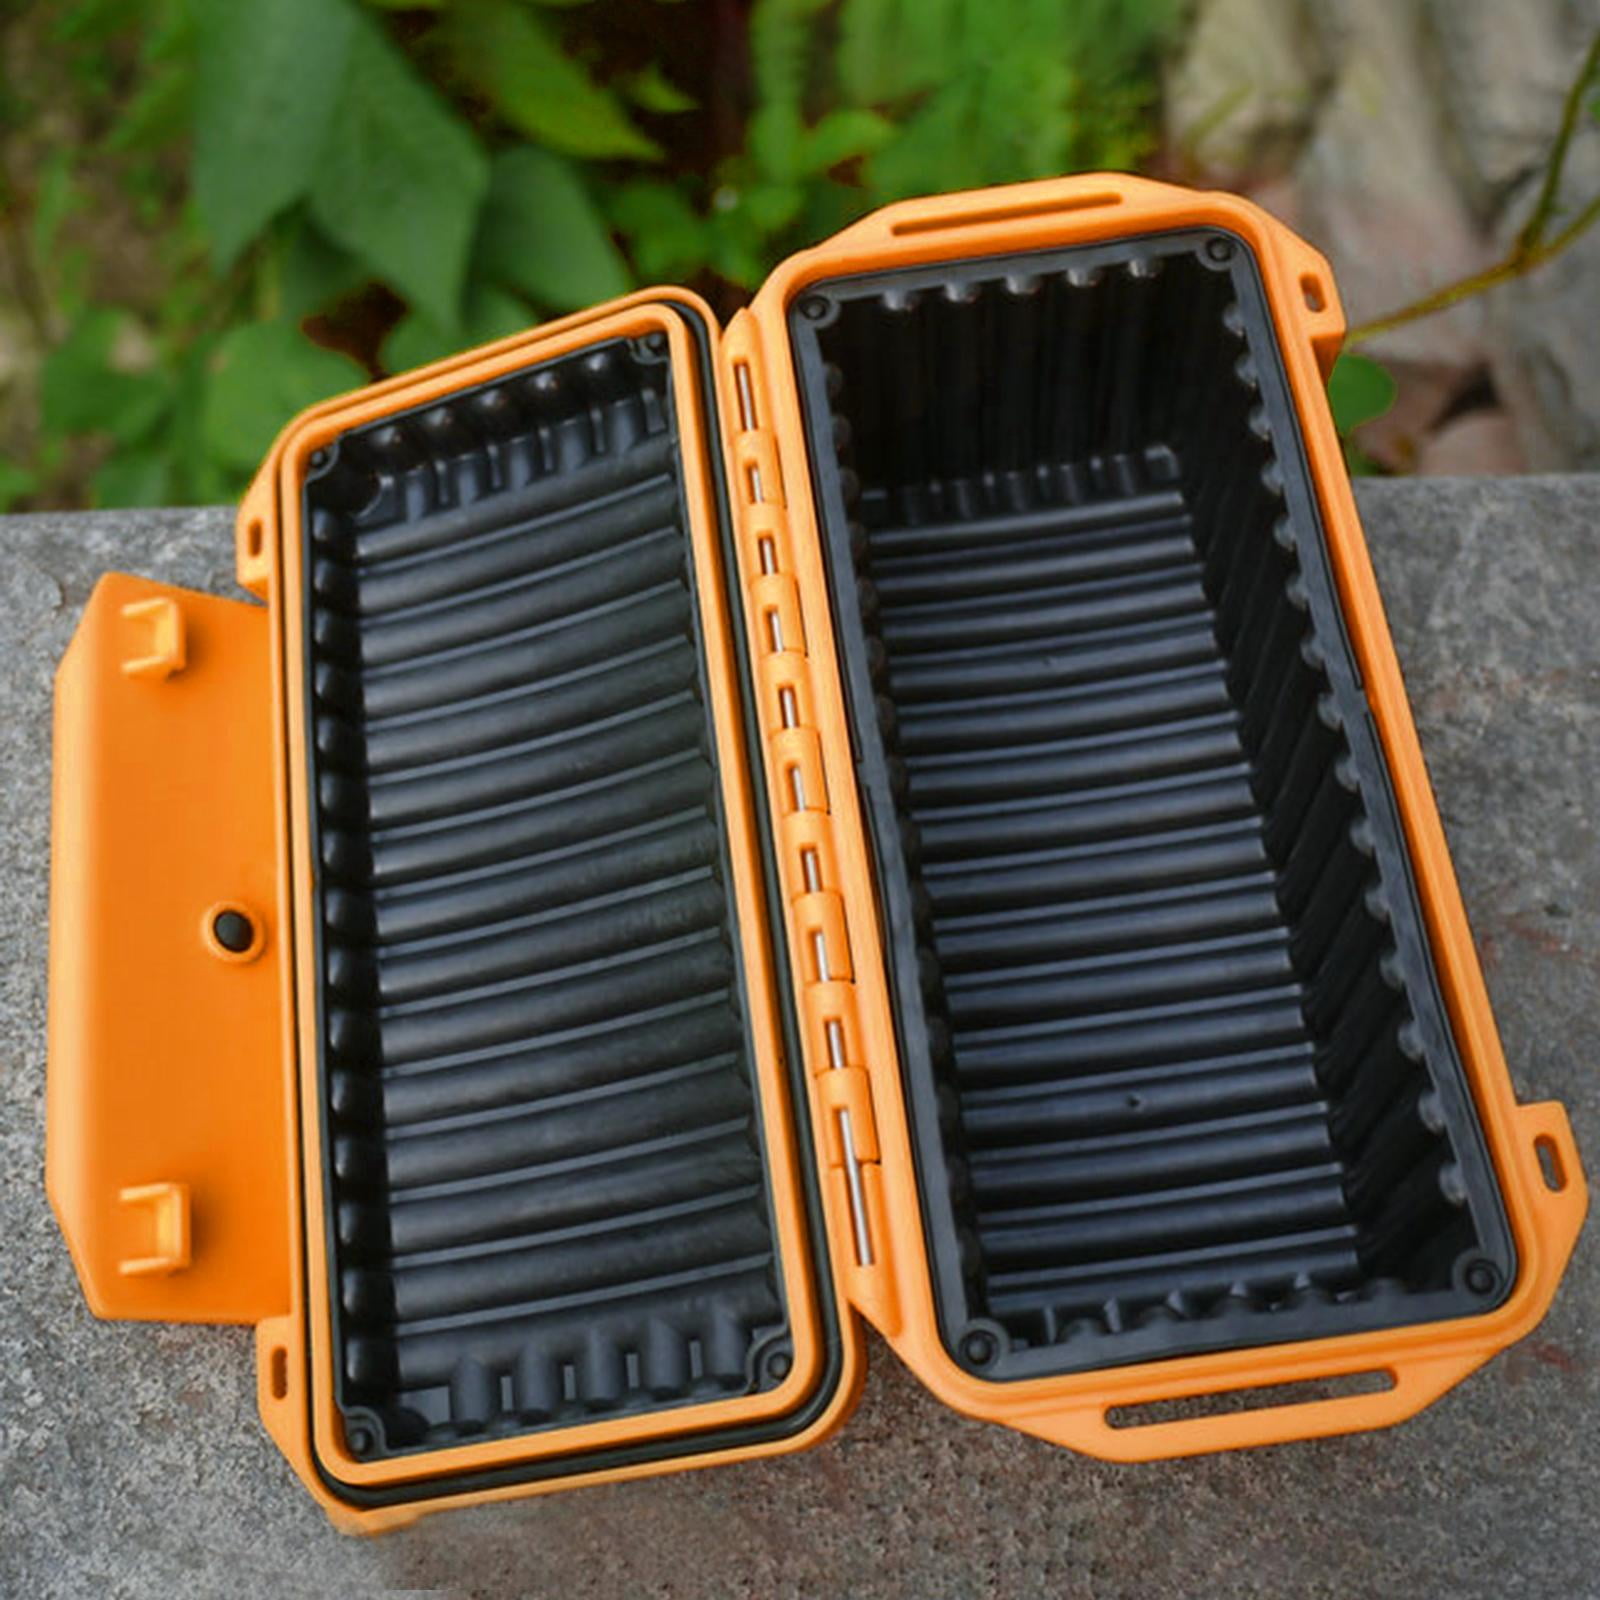 Outdoor Shockproof Impact Resistant Box for Keeping Tools